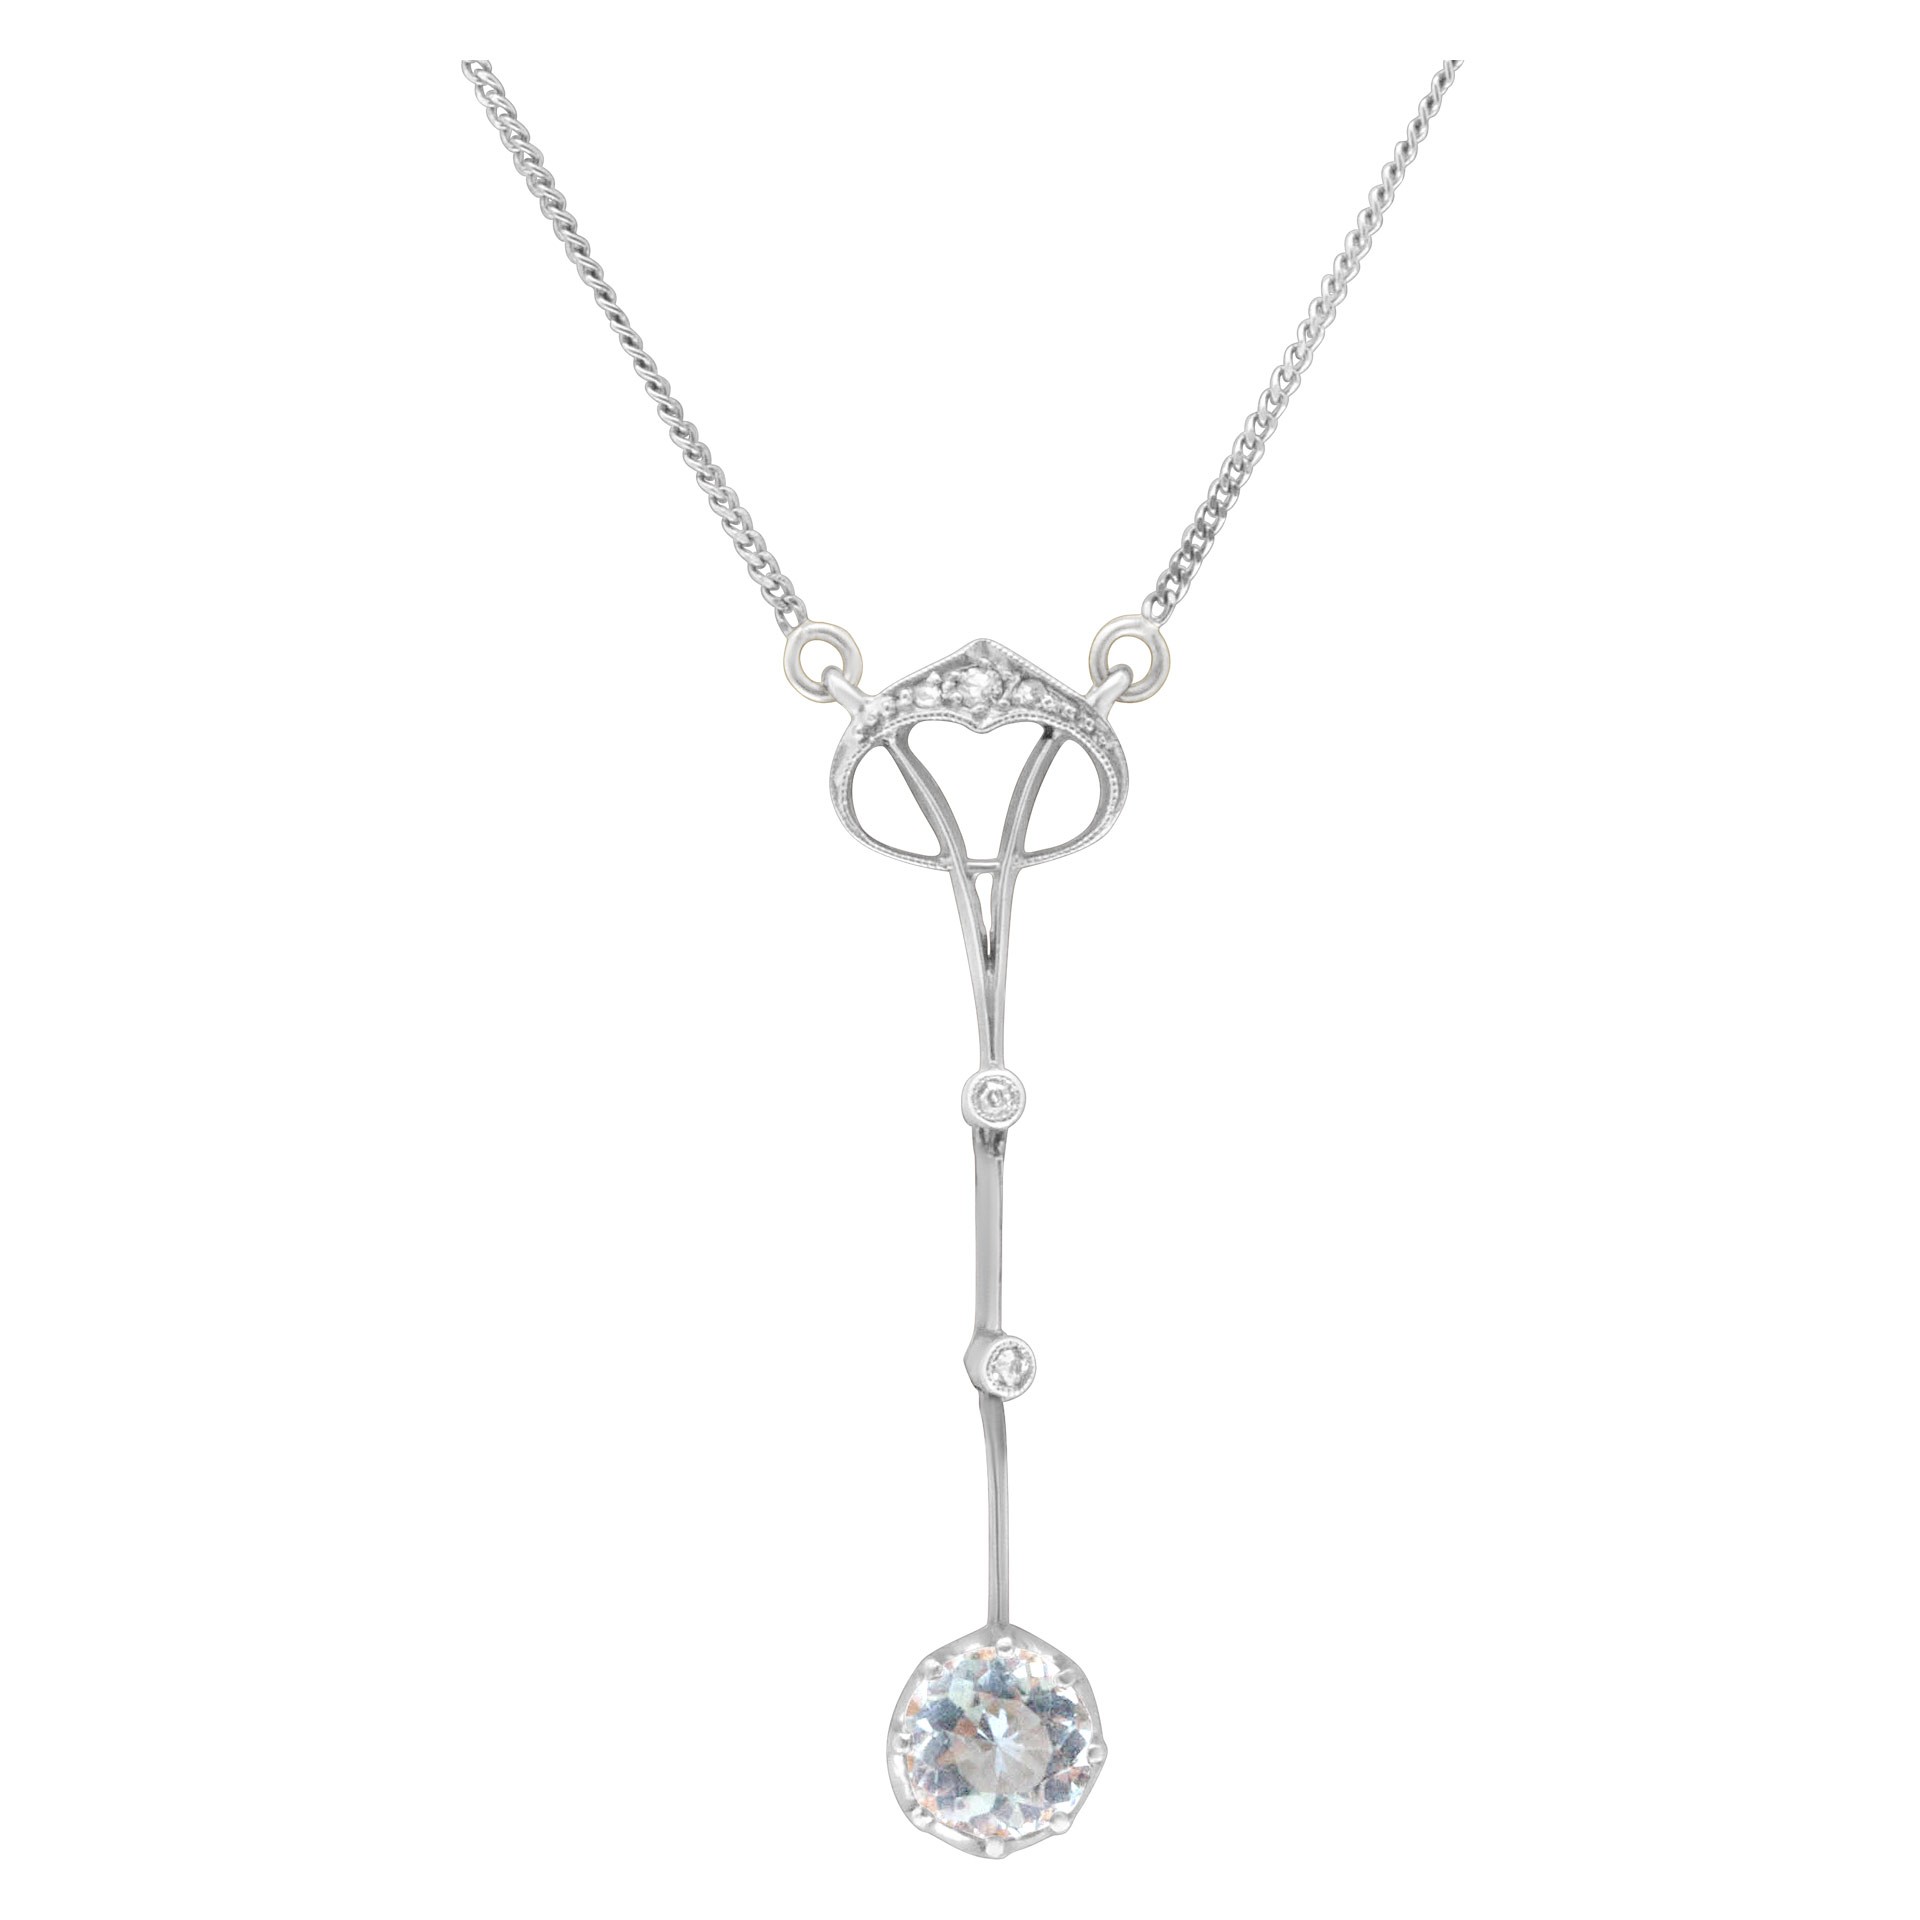 Fine Jewelry for Less than $1000: Platinum and aquamarine necklace